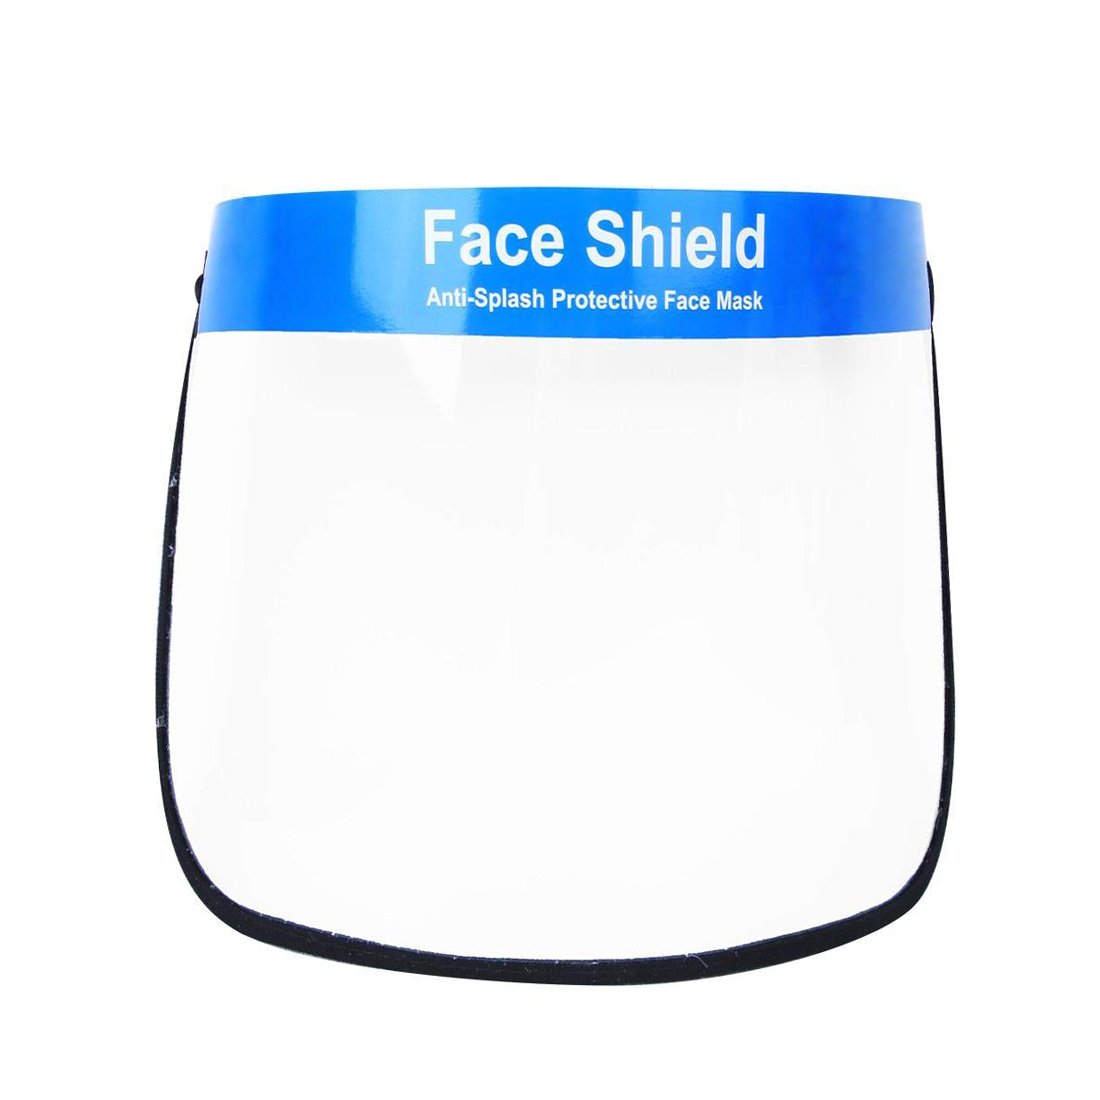 Transparent Full Face Protective Visor with Eye & Head Protection Shield